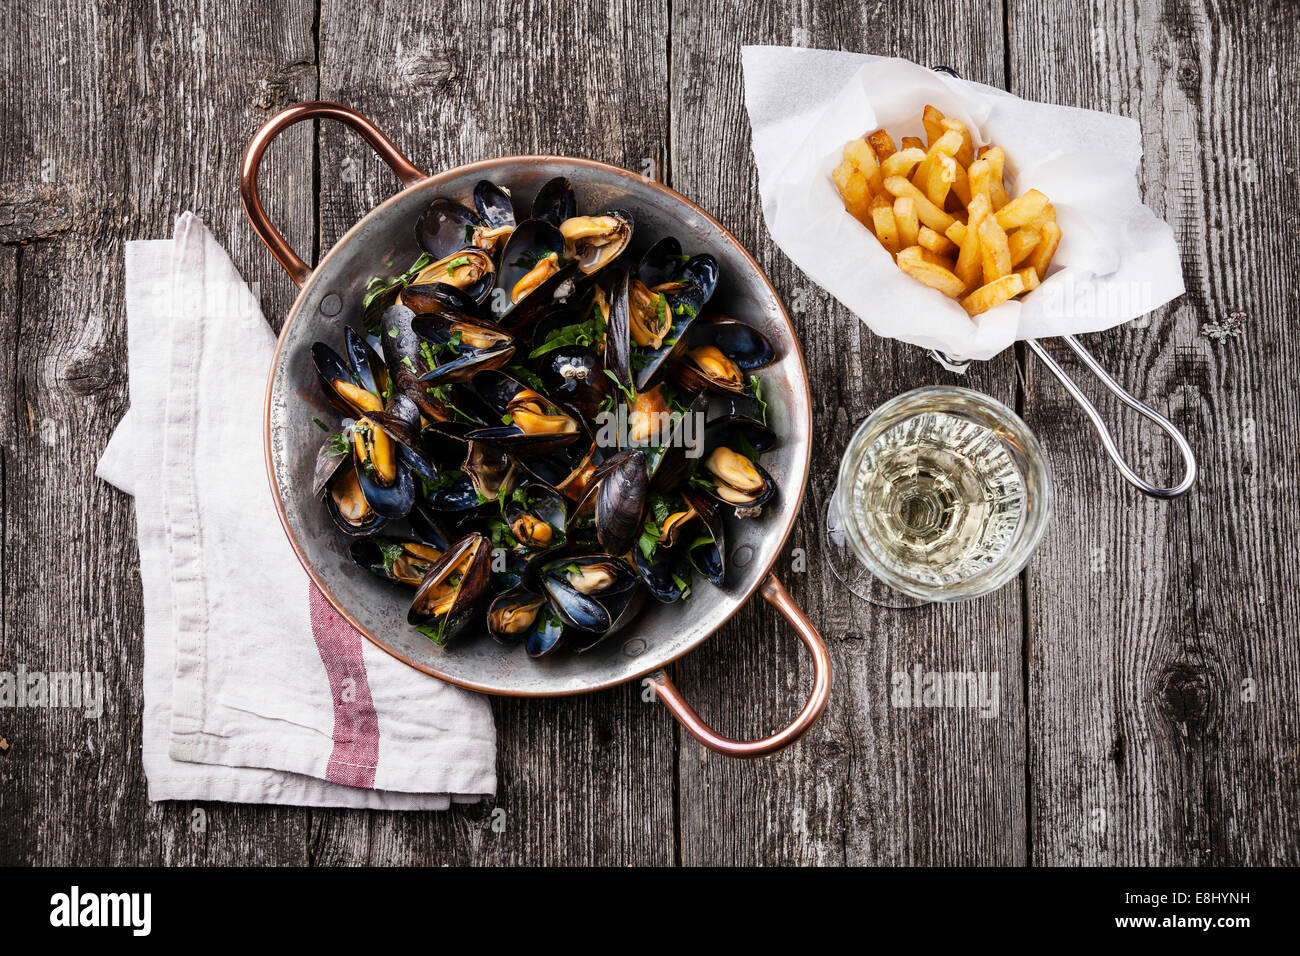 Mussels, french fries and wine on dark wooden background Stock Photo